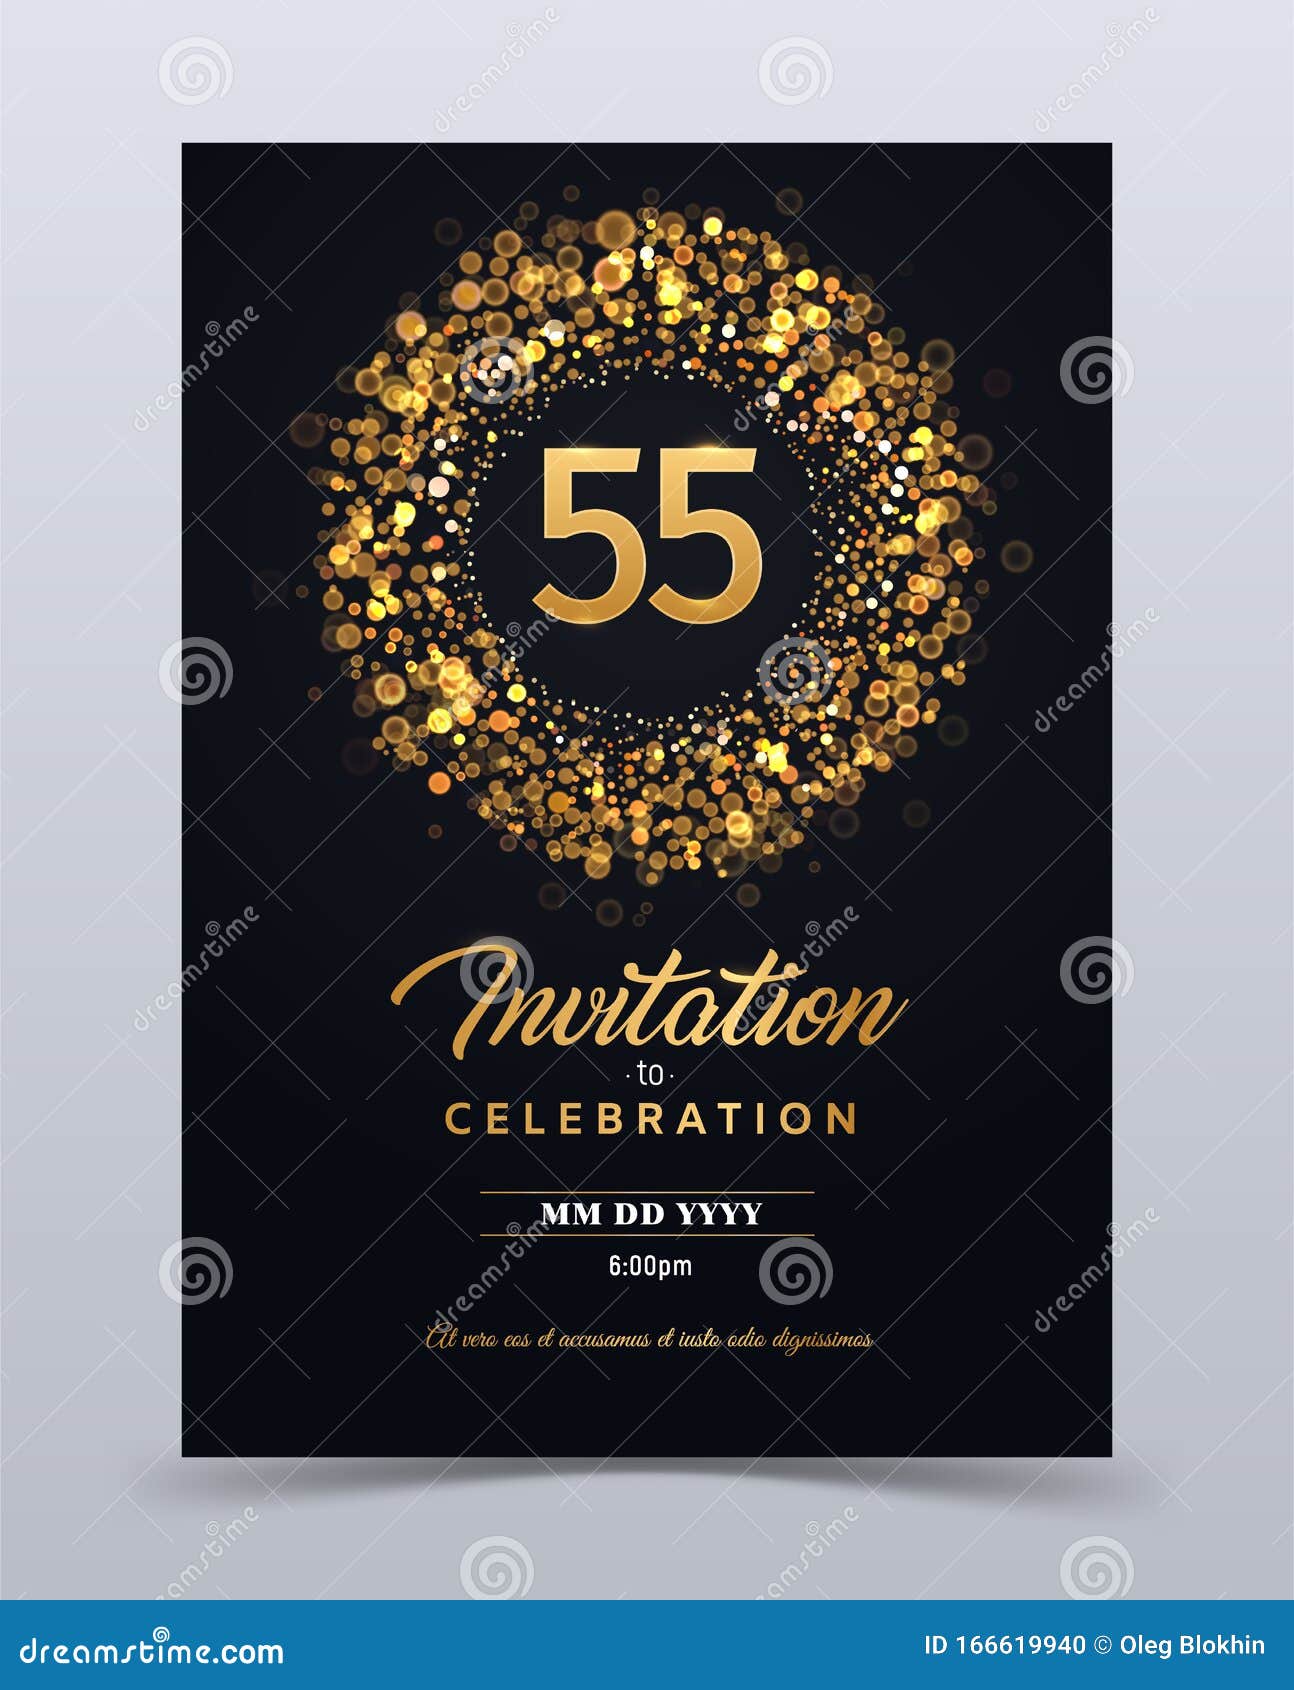 55 Years Anniversary Invitation Card Template Isolated Vector